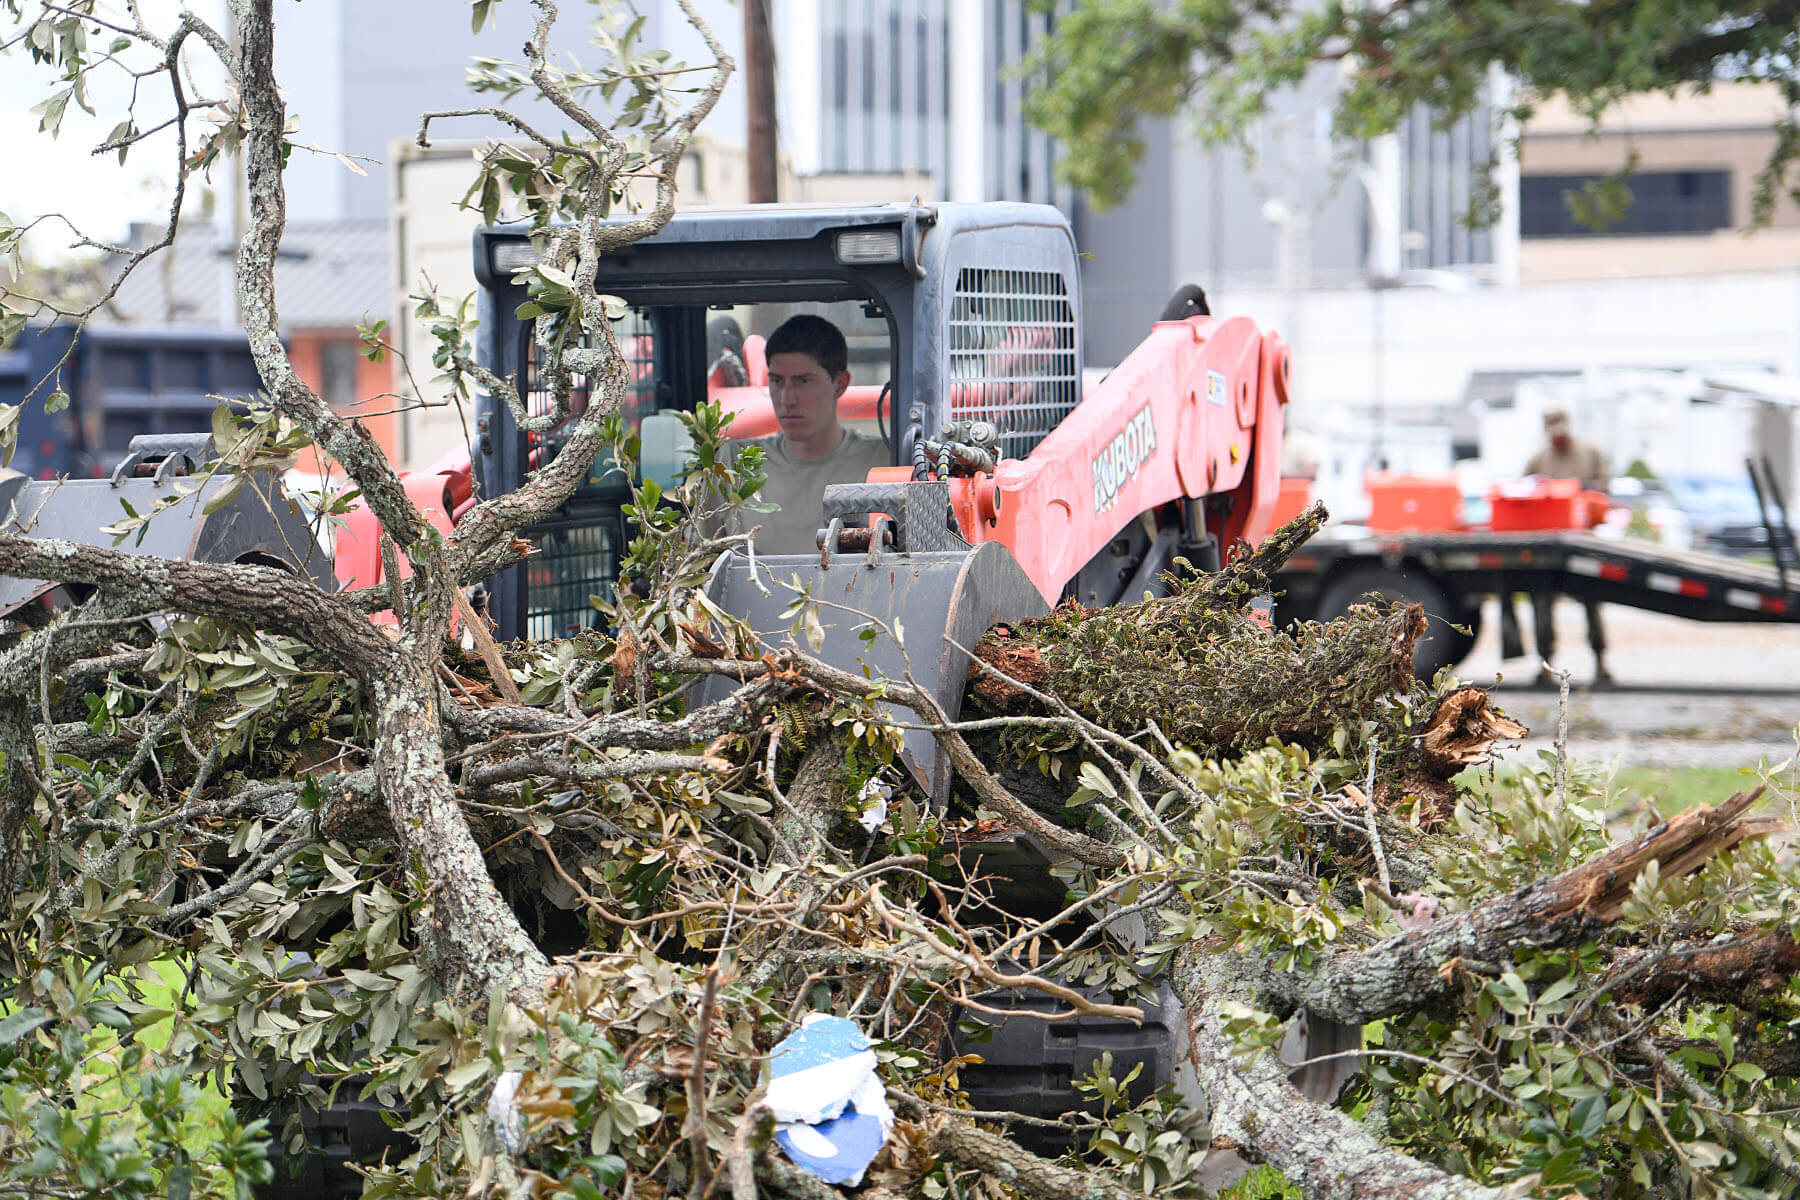 159th Civil Engineering Squadron’s heavy equipment journeyman, Senior Airman William Bommer removes downed tree branches from Hurricane Laura in downtown Lake Charles, La., Aug. 30, 2020.  As part of the 159 CES’s Debris Clearance Package, these Louisiana Air National Guard Airmen were tasked with removing downed trees and rubble for residents to access their homes to assess damages.  (U.S. Air National Guard photo by Senior Master Sgt. Daniel Farrell)